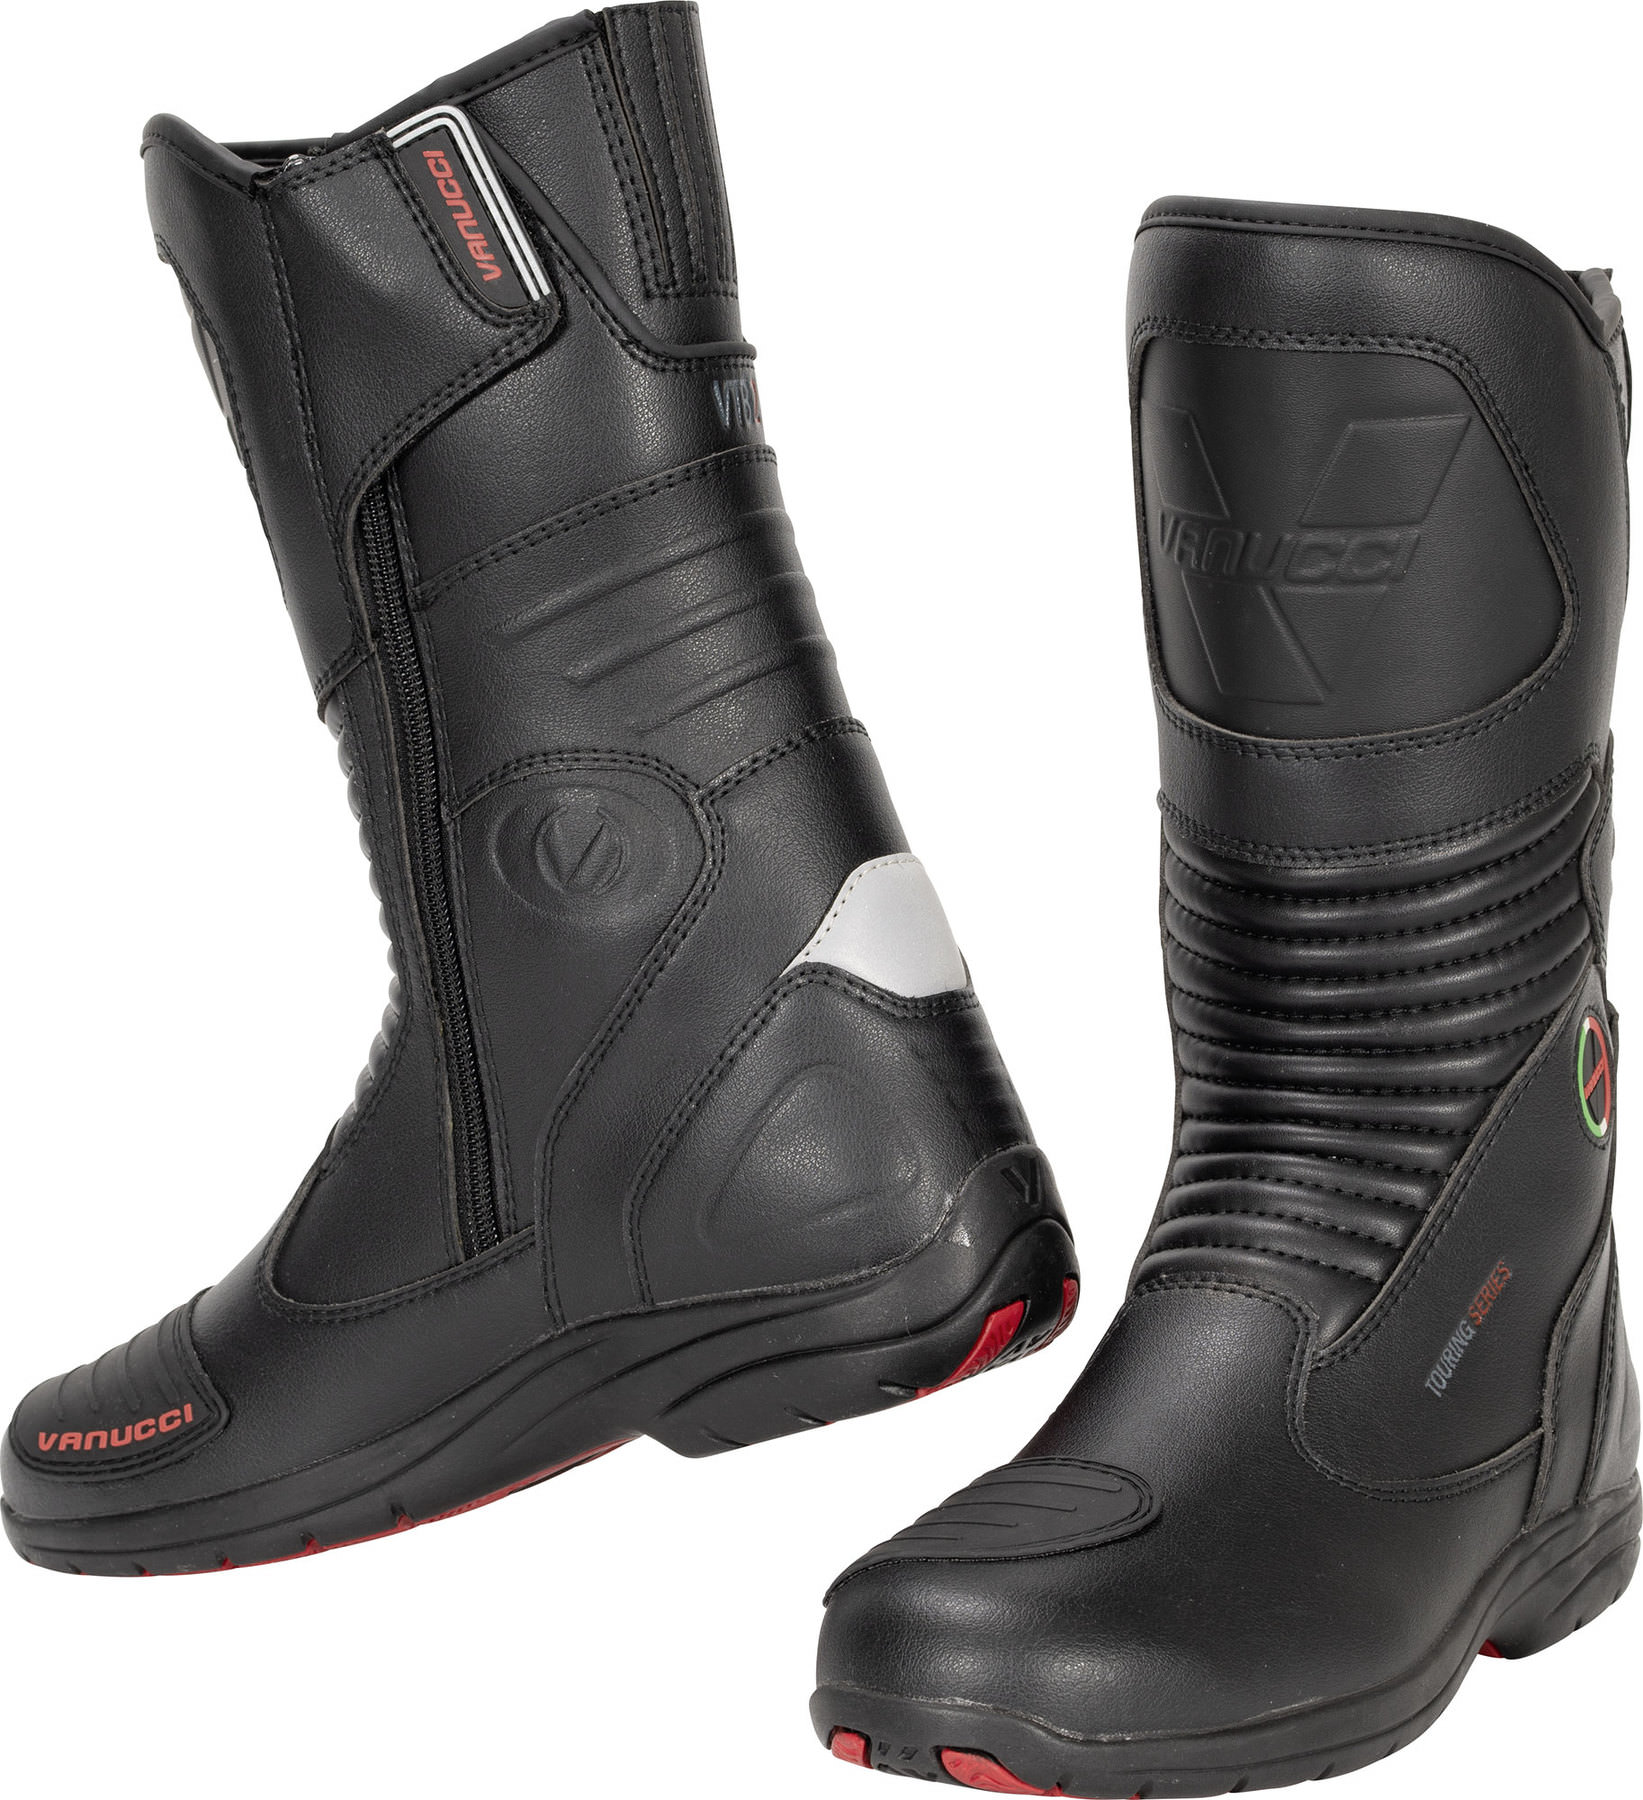 Buy Vanucci VTB 2.1 Boots | Louis motorcycle clothing and technology